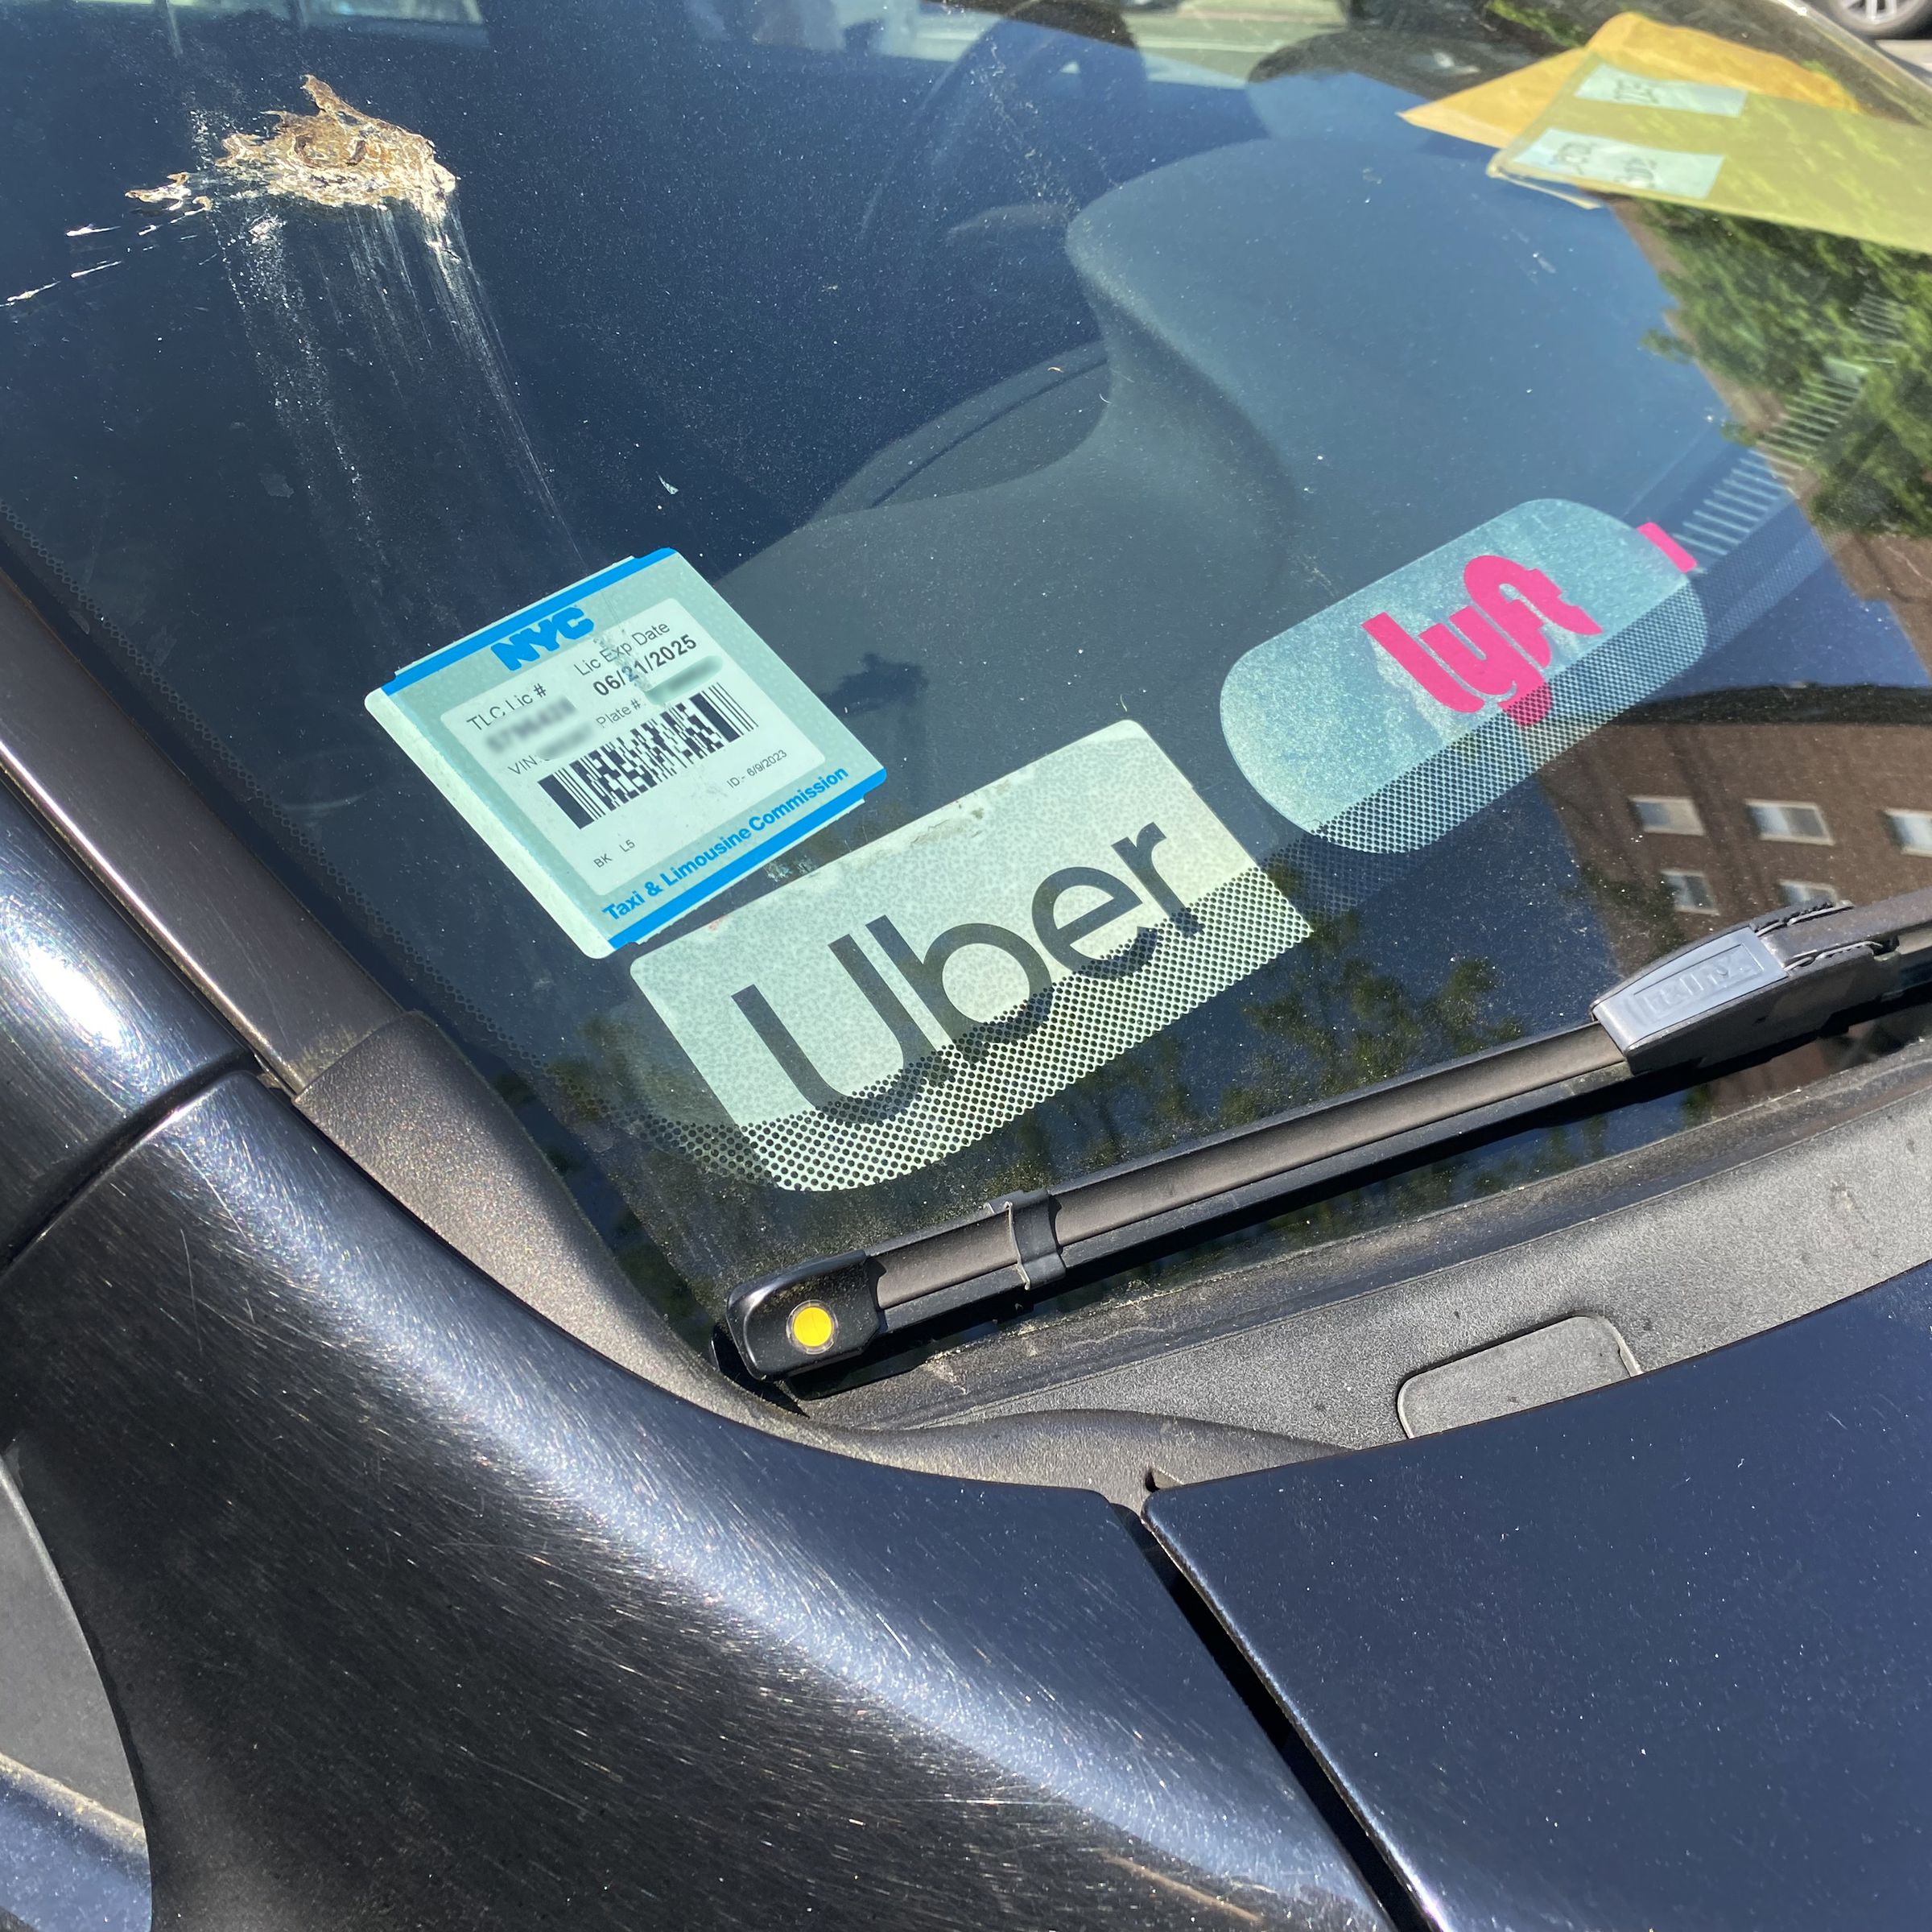 Uber and Lyft Driver, signs in car window, Queens, New York